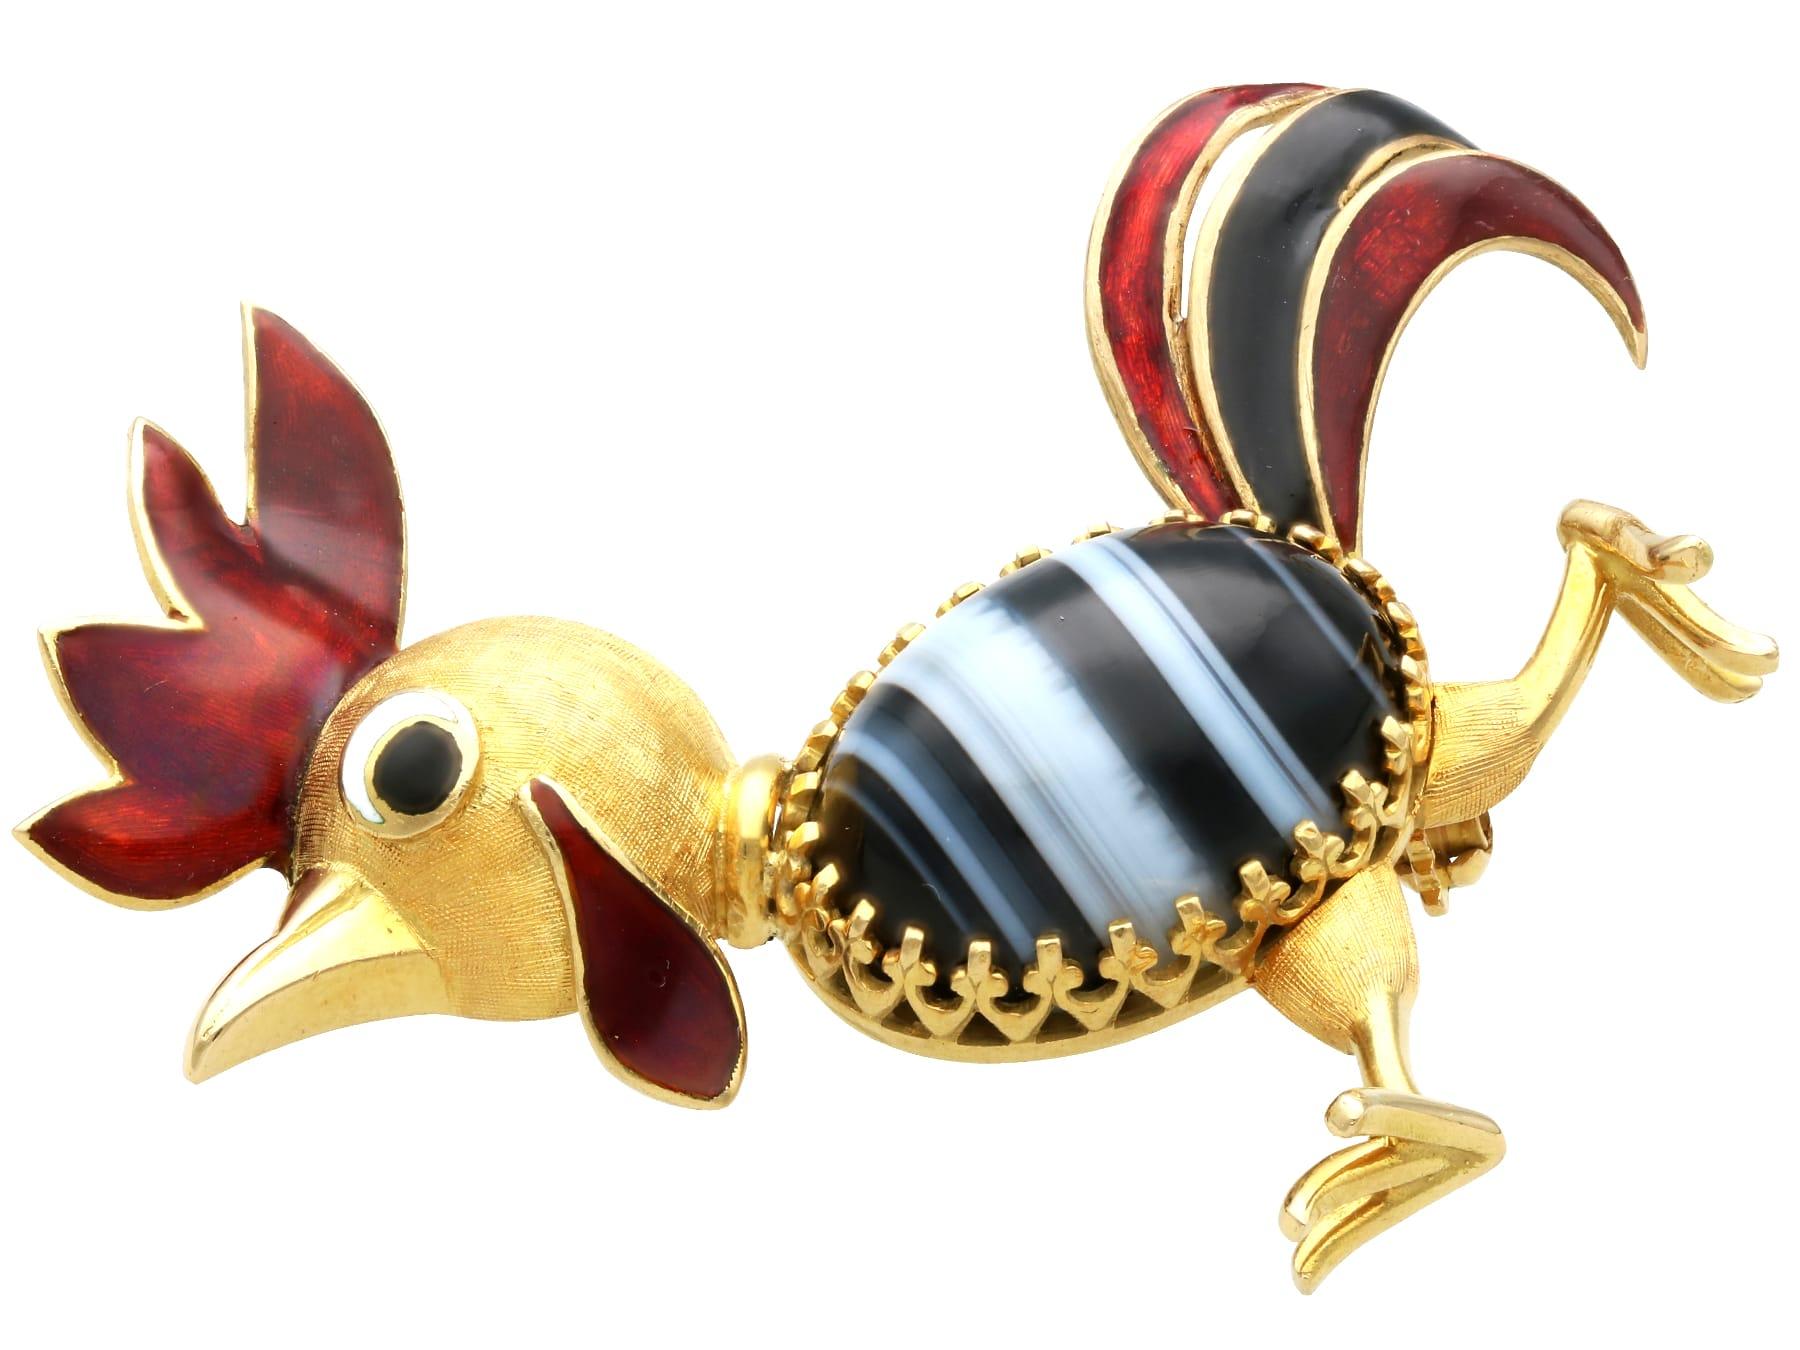 1950s Italian 11.19ct Banded Agate, Enamel and 18k Yellow Gold Cockerel Brooch In Excellent Condition For Sale In Jesmond, Newcastle Upon Tyne